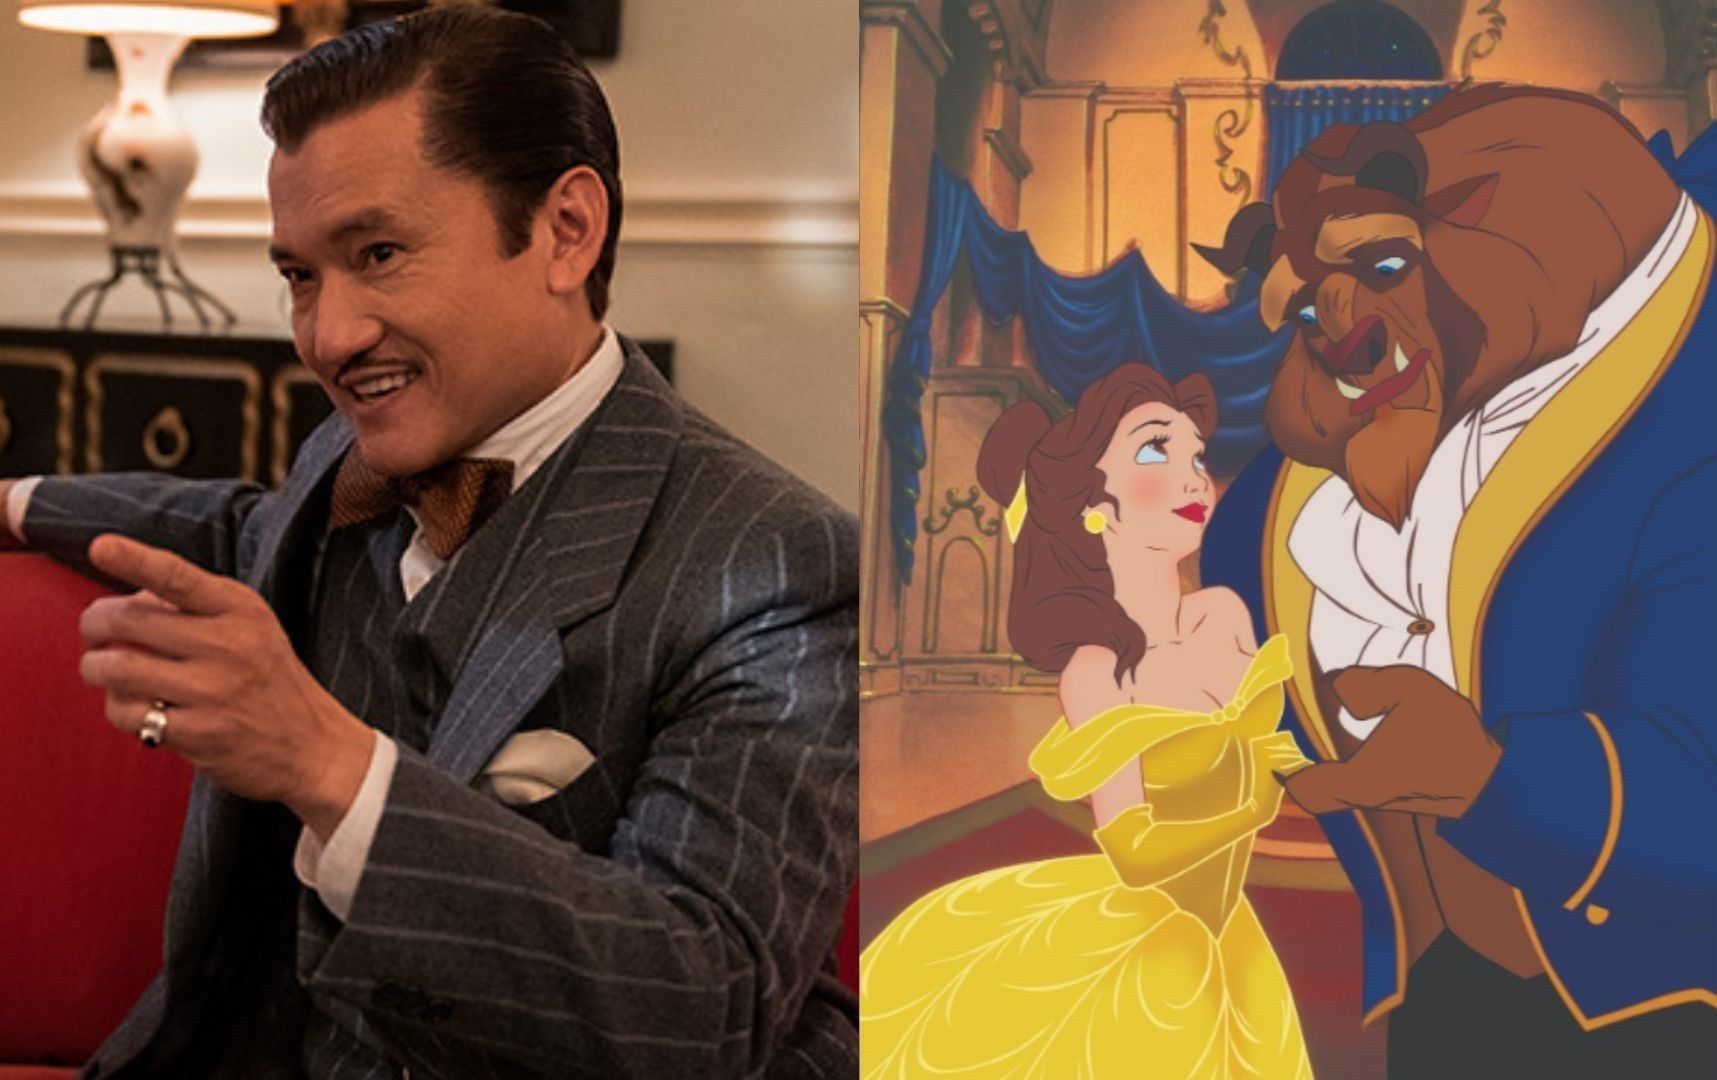 Pinoy actor Jon Jon Briones joins Disney's 'Beauty and the Beast' special